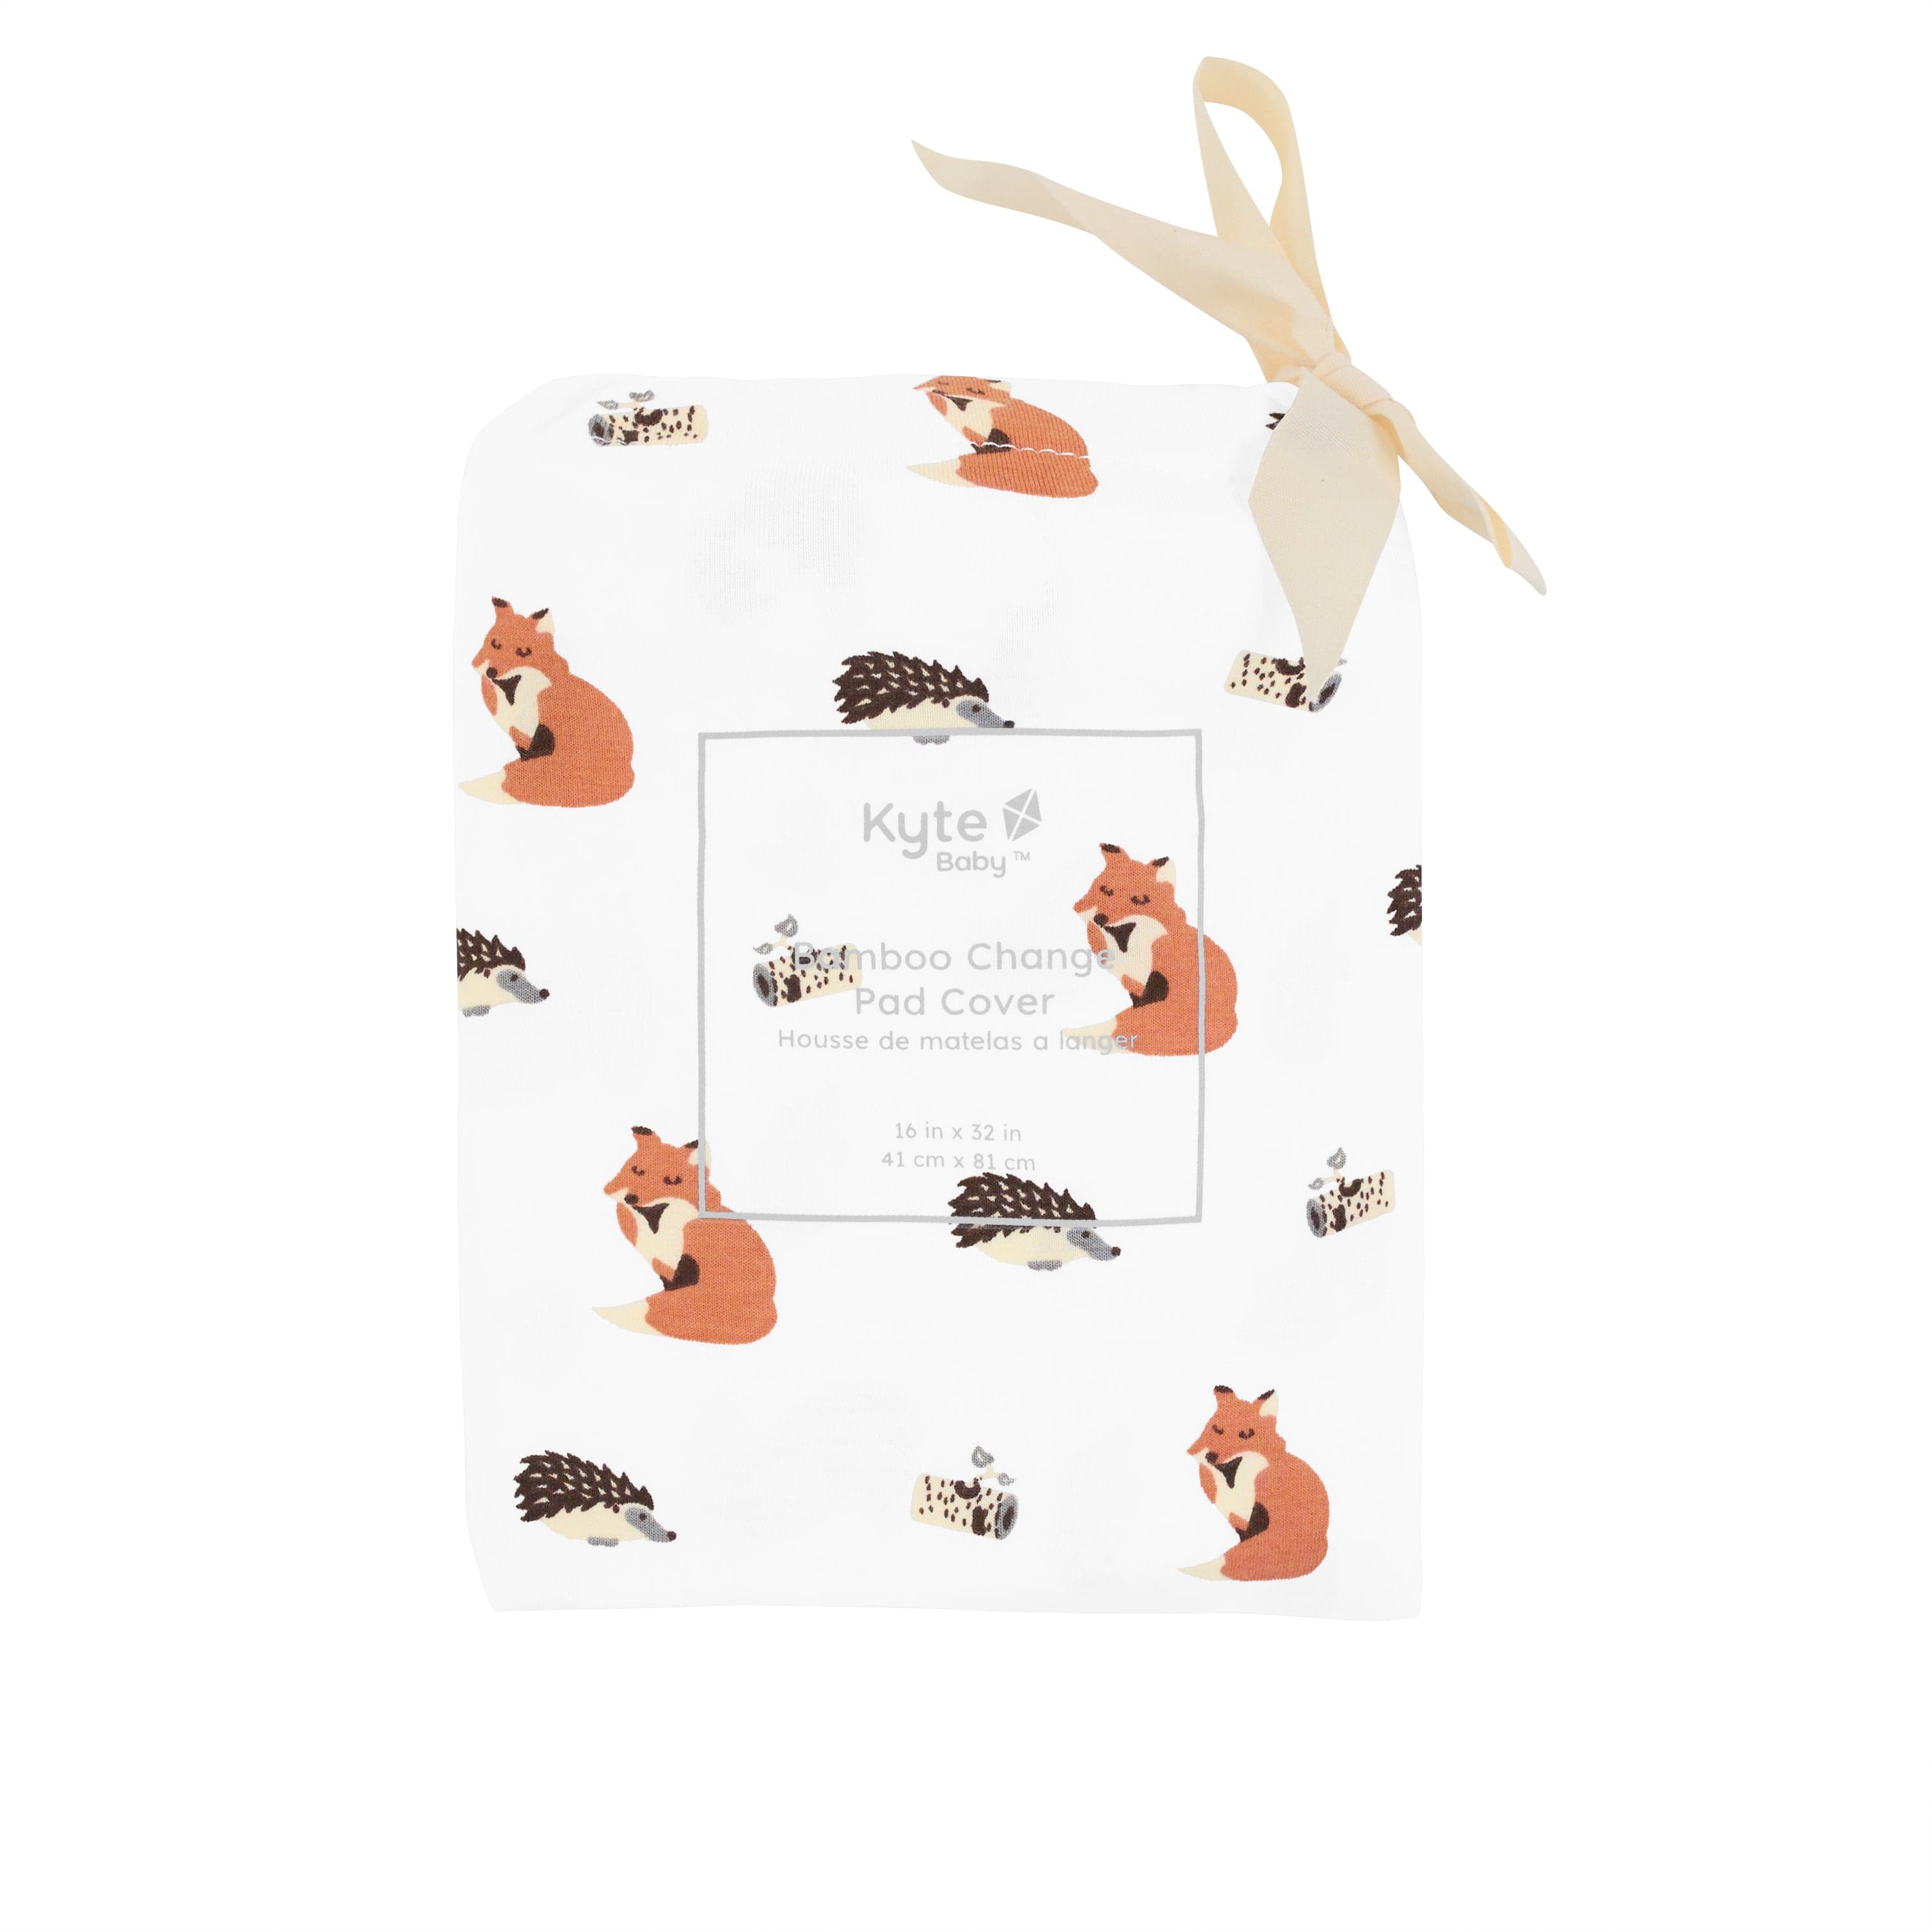 Kyte Baby Change Pad Cover Sienna Woodland / One Size Change Pad Cover in Sienna Woodland